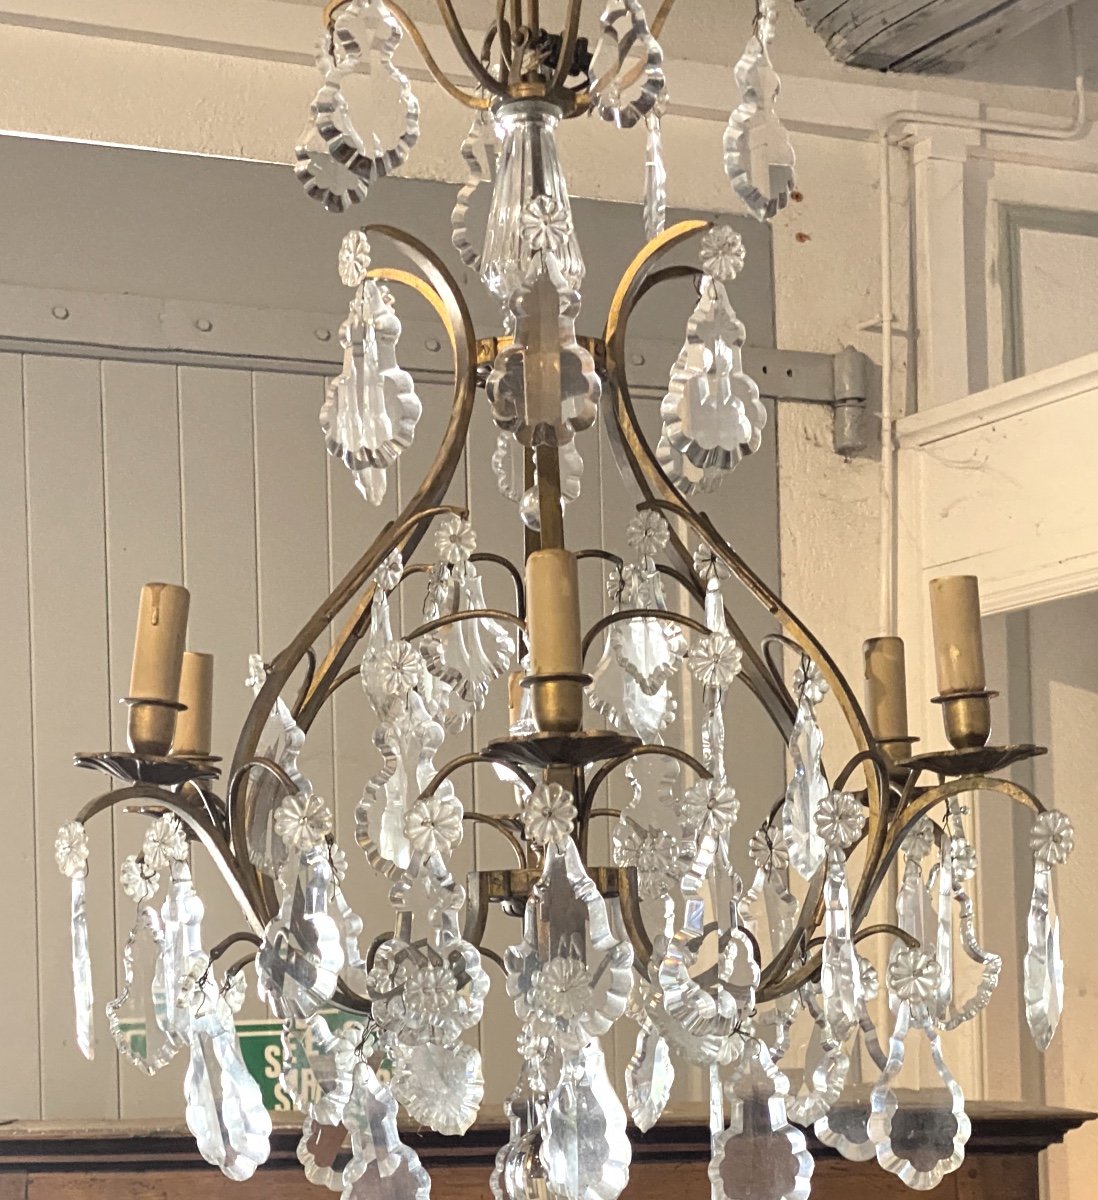 Six Branch Cage Chandelier In Old Gold Gilded Brass With Tassels And Crystal Pendants